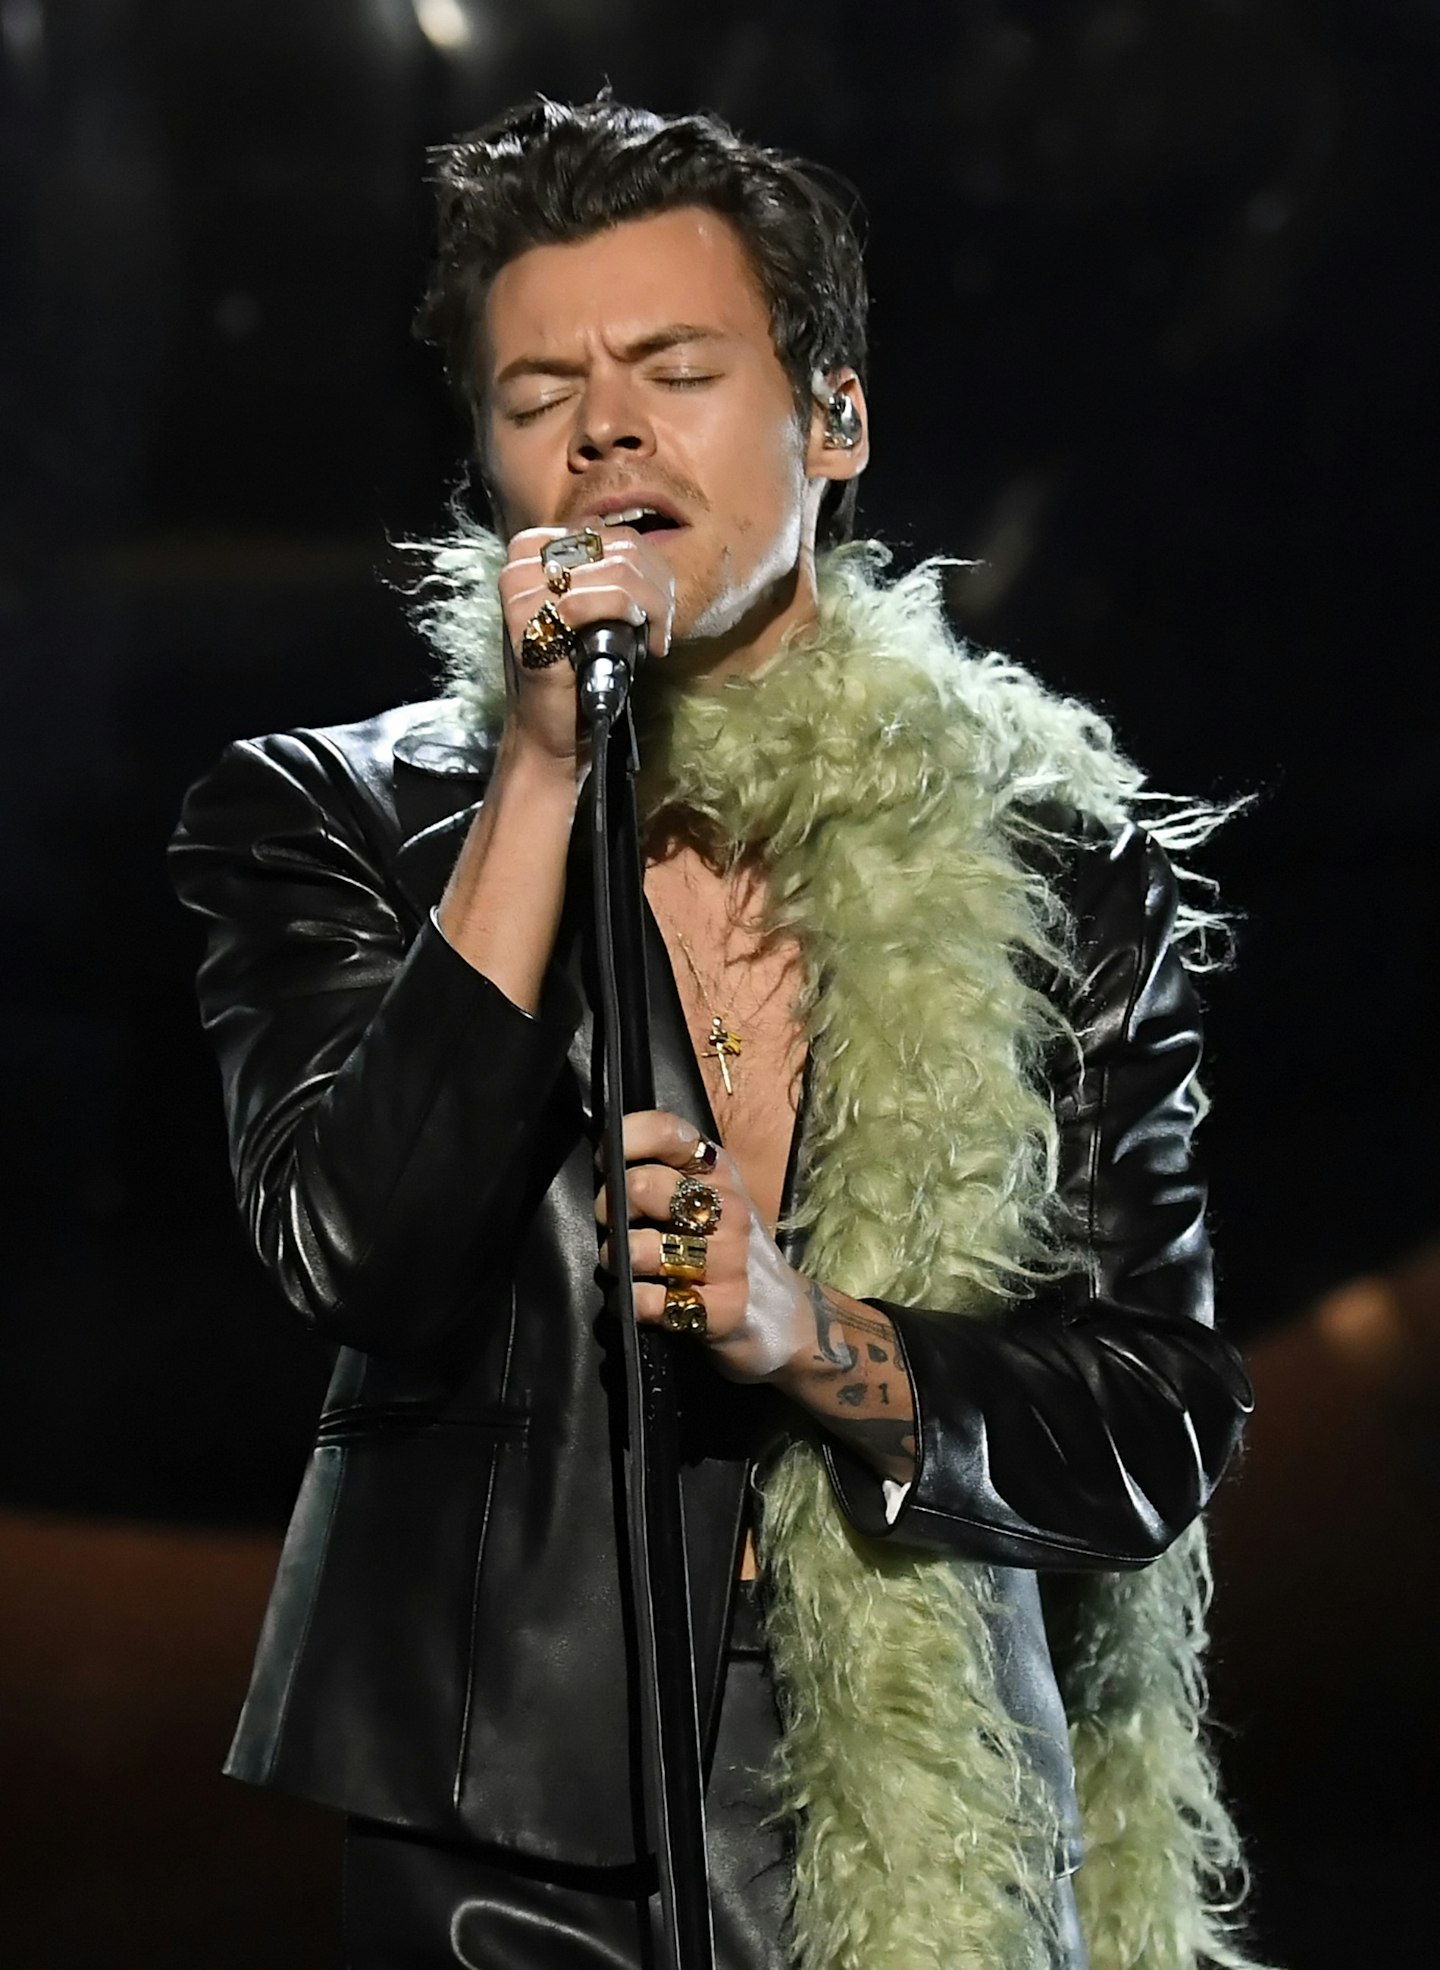 Harry Styles wearing a leather suit and green feather boa at this year's Grammy Awards